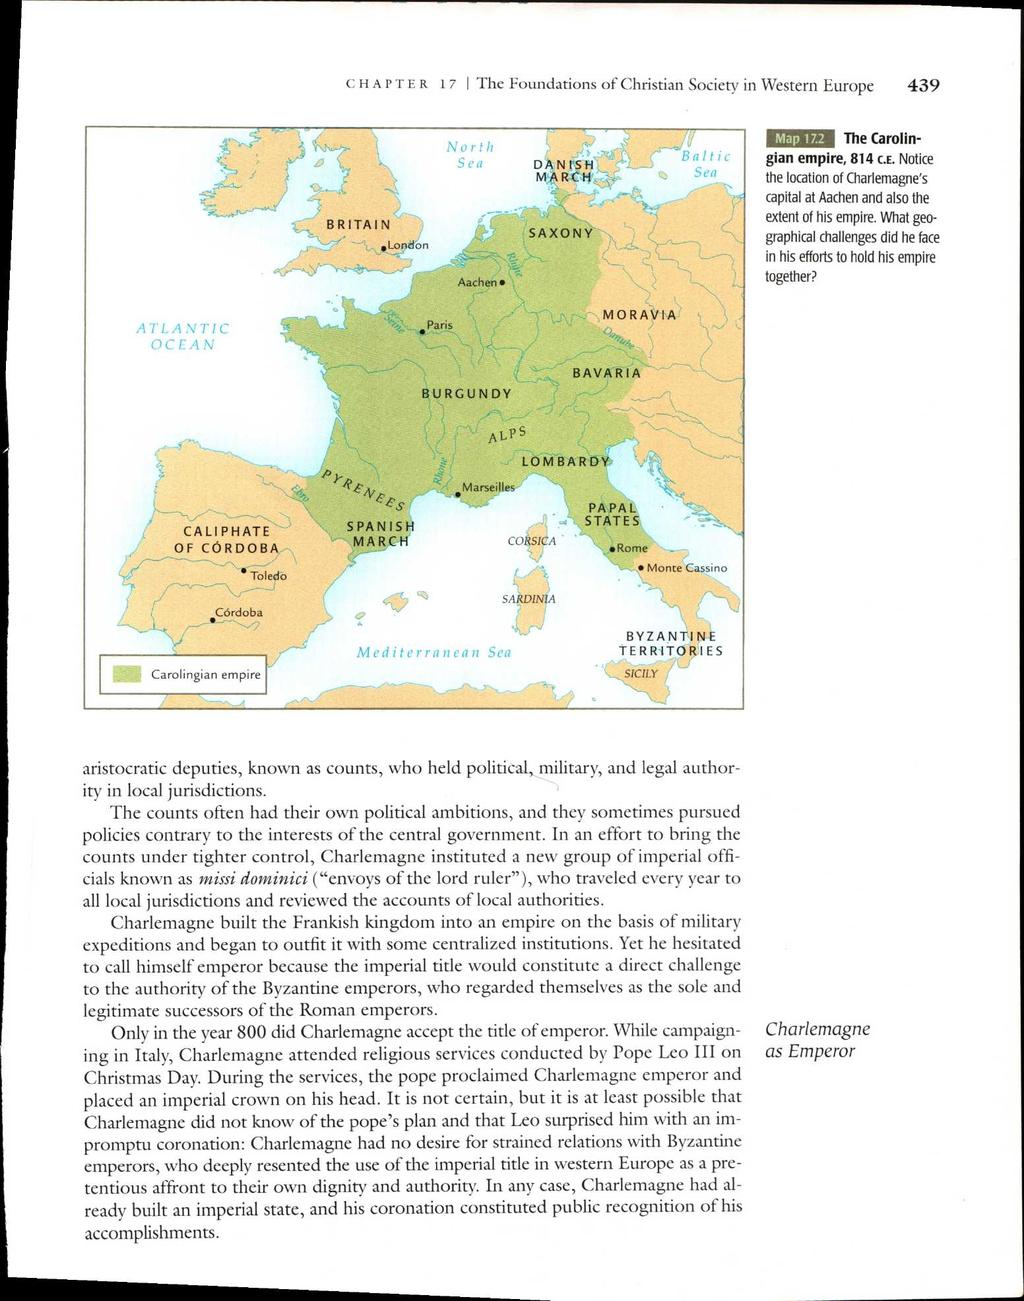 CHAPTER 17 I The Foundations of Christian Society in Western Europe 439 BRITAIN London Aachen DANISH MARCH SAXONY The Carolingian empire, 814 CE.